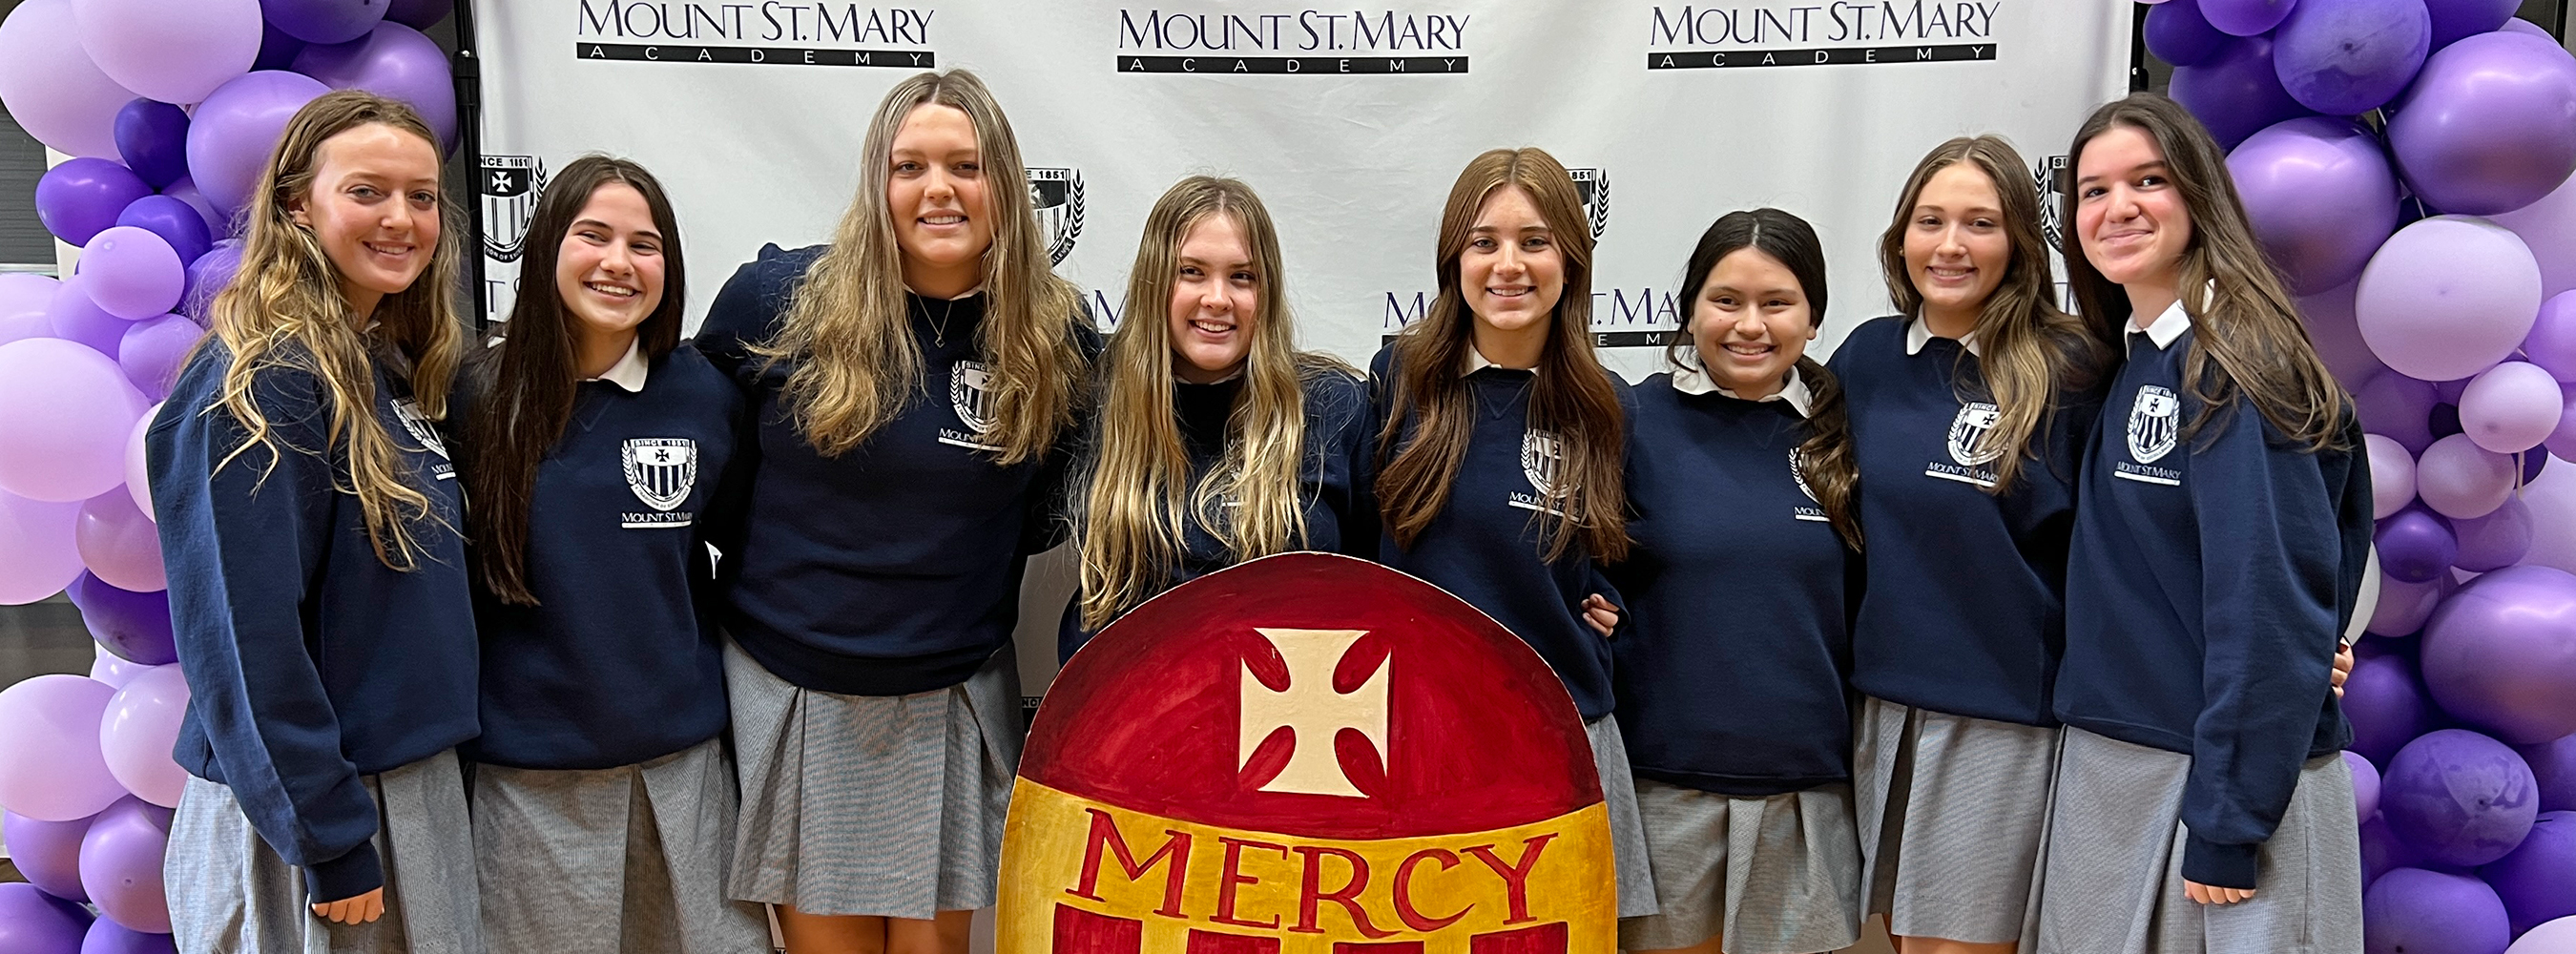 group of students standing with sign of Mercy shield